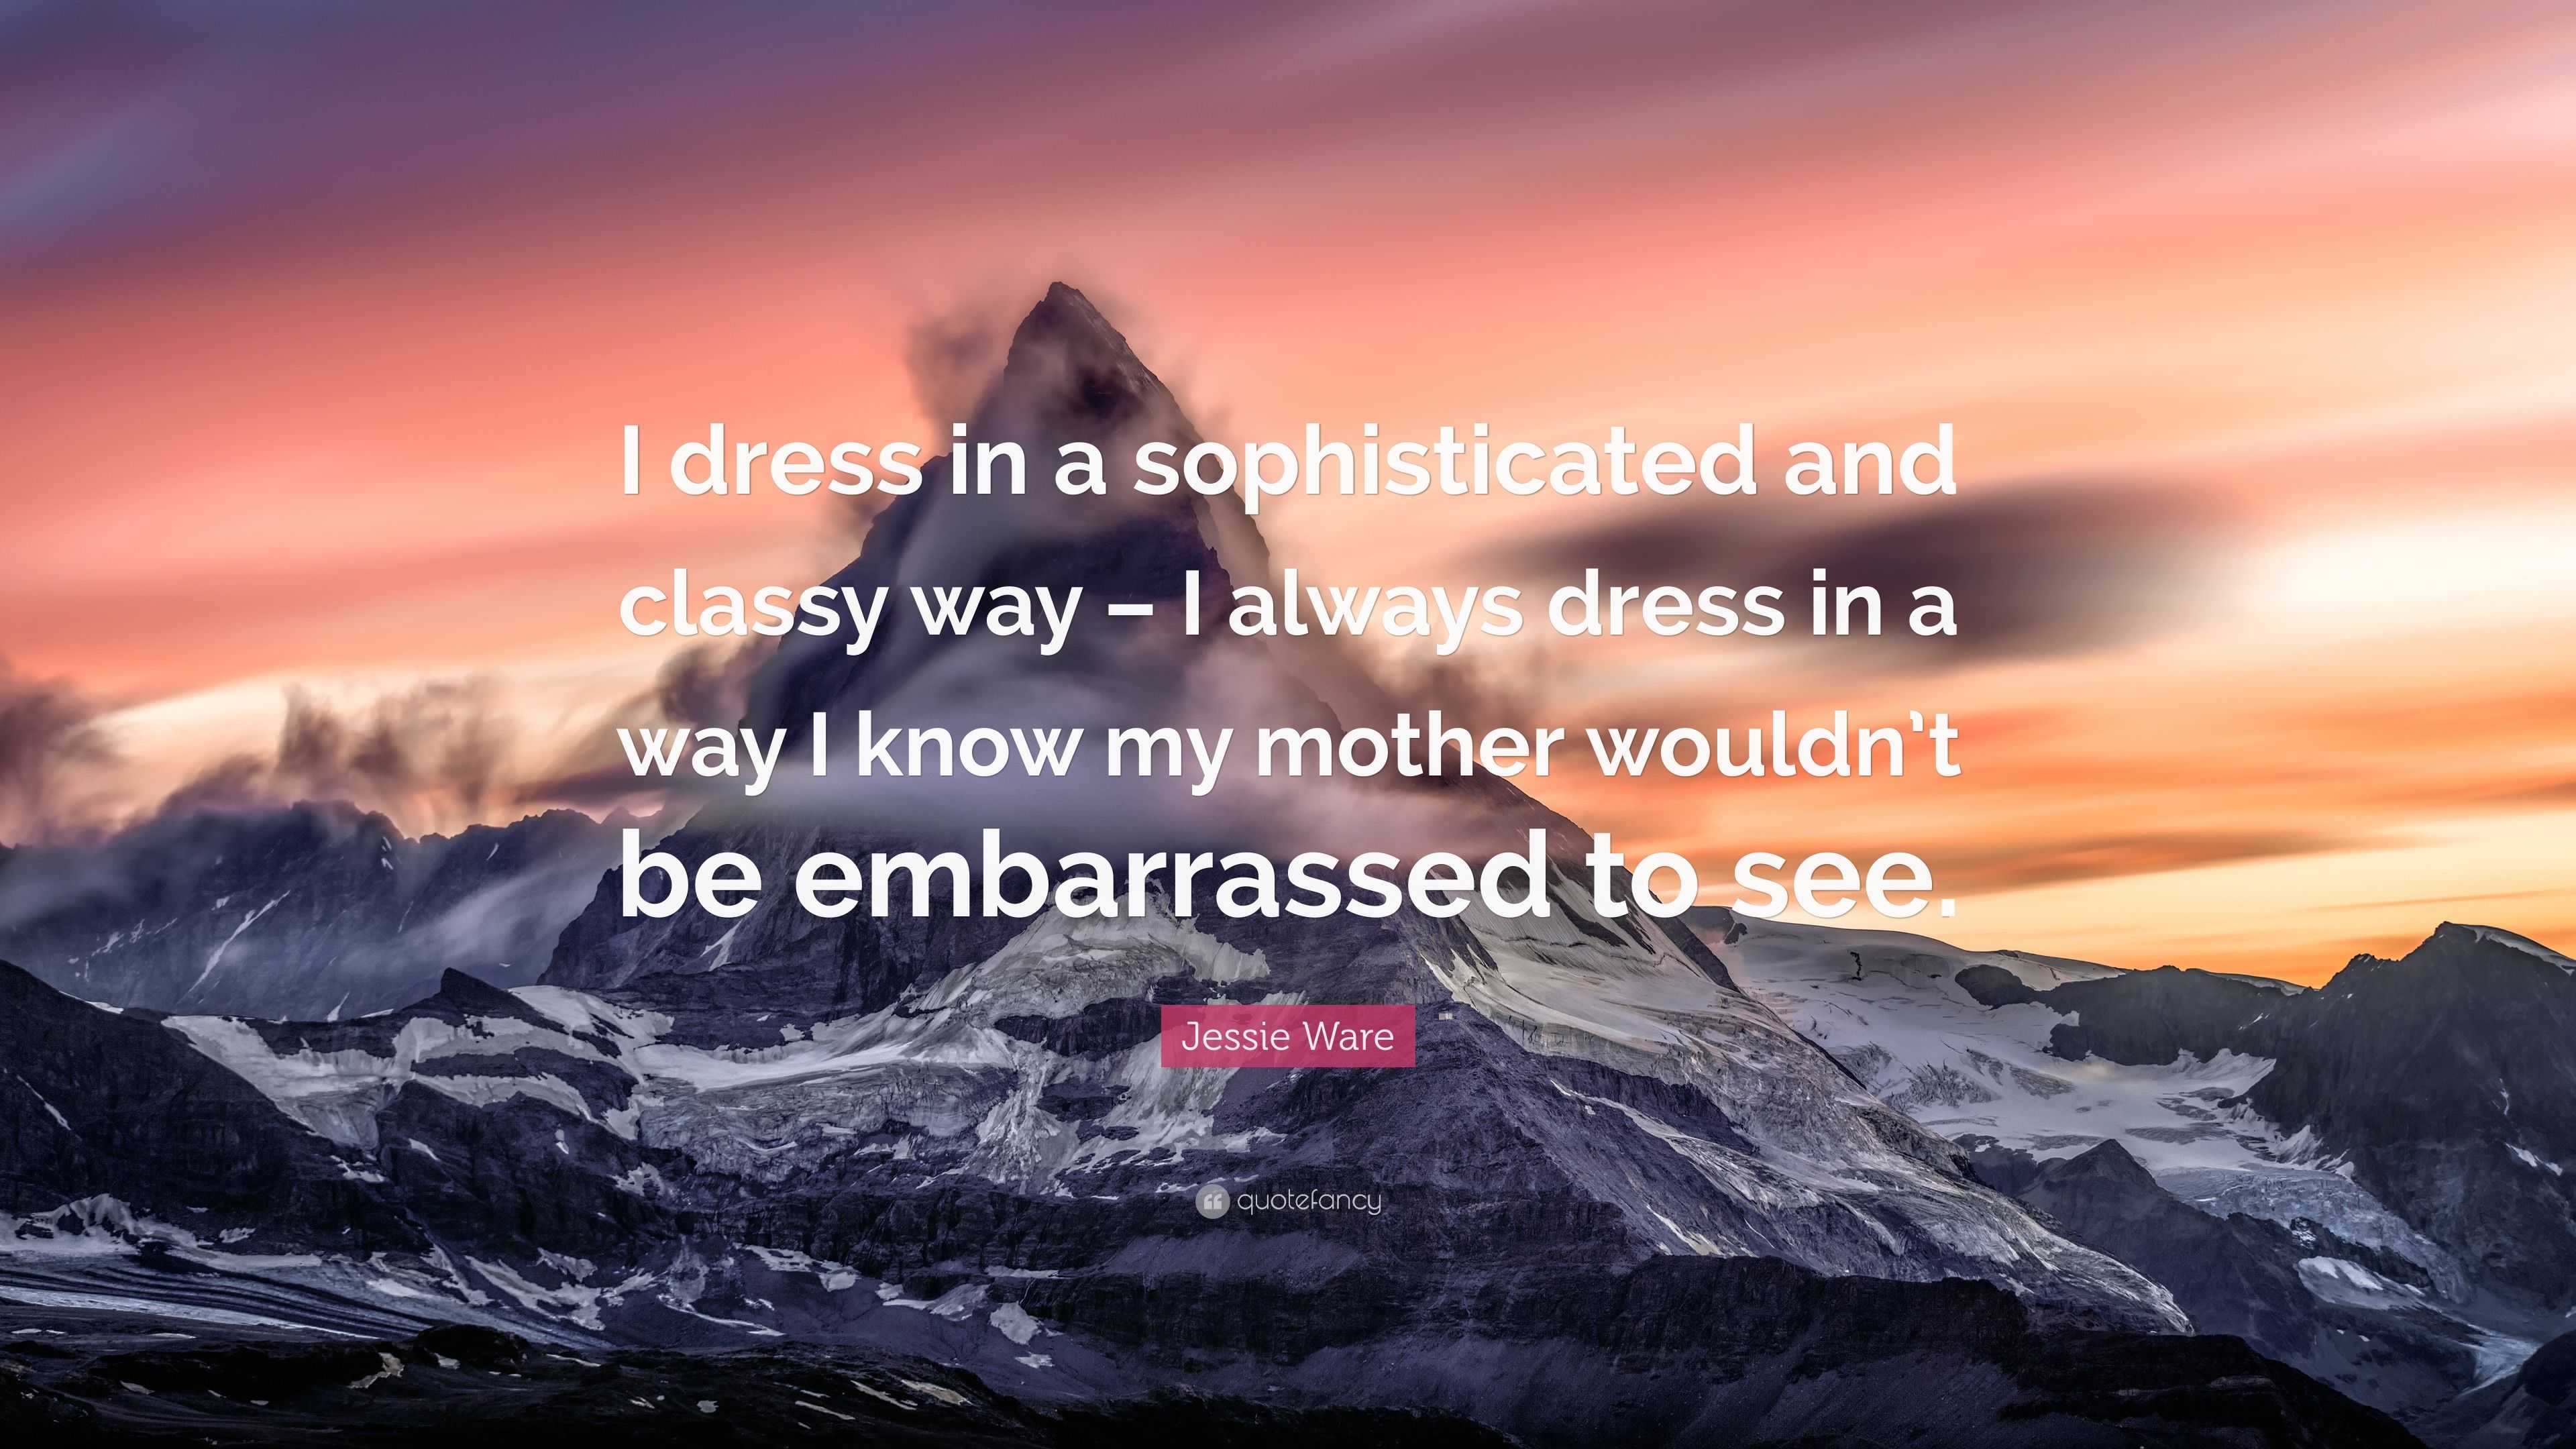 100 Perfect Classy Captions for Instagram (With Quotes!)